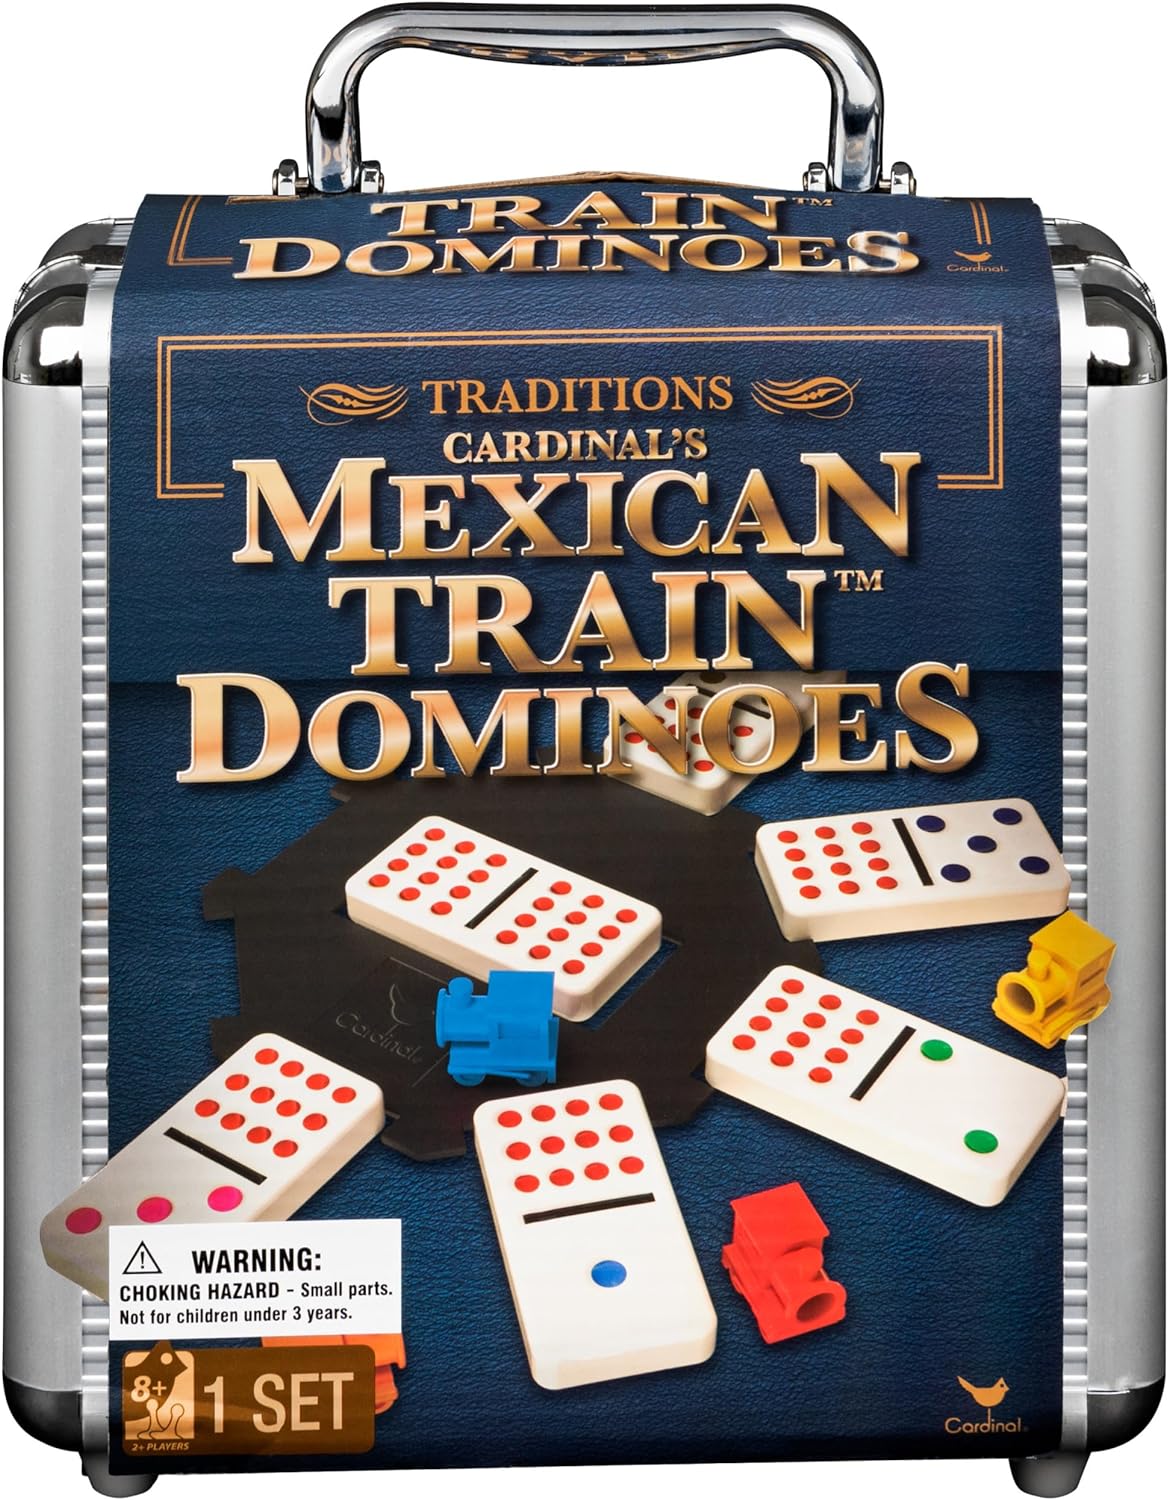 Mex Train Product Description - This set comes with Toot Toot sound domino hub, set of double 12 color dot dominoes, 9 colorful trains, score pad, easy to learn instructions all pack in a lovely aluminum case.Deluxe style classic game sets at retro discounts from Pavilion Games exclusively from Toys'R'Us! Checkers, Chess, Backgammon, Dominoes and Cribbage sets plus other classic games for kids of all ages never go out of style. Real wood game sets or travel sets that feature several games in one are guaranteed for long-lasting fun after the batteries run out in everything else. All Pavilion strategy games and game sets come complete with instructions for classic play and variation play as well.Weight (kg): 2.45Dimensions (cm): 23 x 21 x 9 メキシコダブル12?, 91?Dominoカラードットセットのアルミニウム製のキャリーケース セット内容基本12色の水玉のドミノ、Nineスターターピース、ダブルマーカー、スコアパッド パッケージ内に8?" x 8?" x 3.5?"アルミ収納ケース 2???8プレーヤー&年齢: 8。2以降を メキシコの列車ドミノゲームは、流行に左右されないクラシック ブランド Cardinal メーカー Toyland シリーズ 10451001688 製品サイズ 24.13 x 20.32 x 9.4 cm; 1 kg 商品モデル番号 6030756 メーカーにより製造中止になりました はい 商品の寸法　幅 × 高さ 24.1 x 20.3 x 9.4 cm 同梱バッテリー いいえ リチウム電池パック 電池内蔵 商品の重量 1 Kilograms